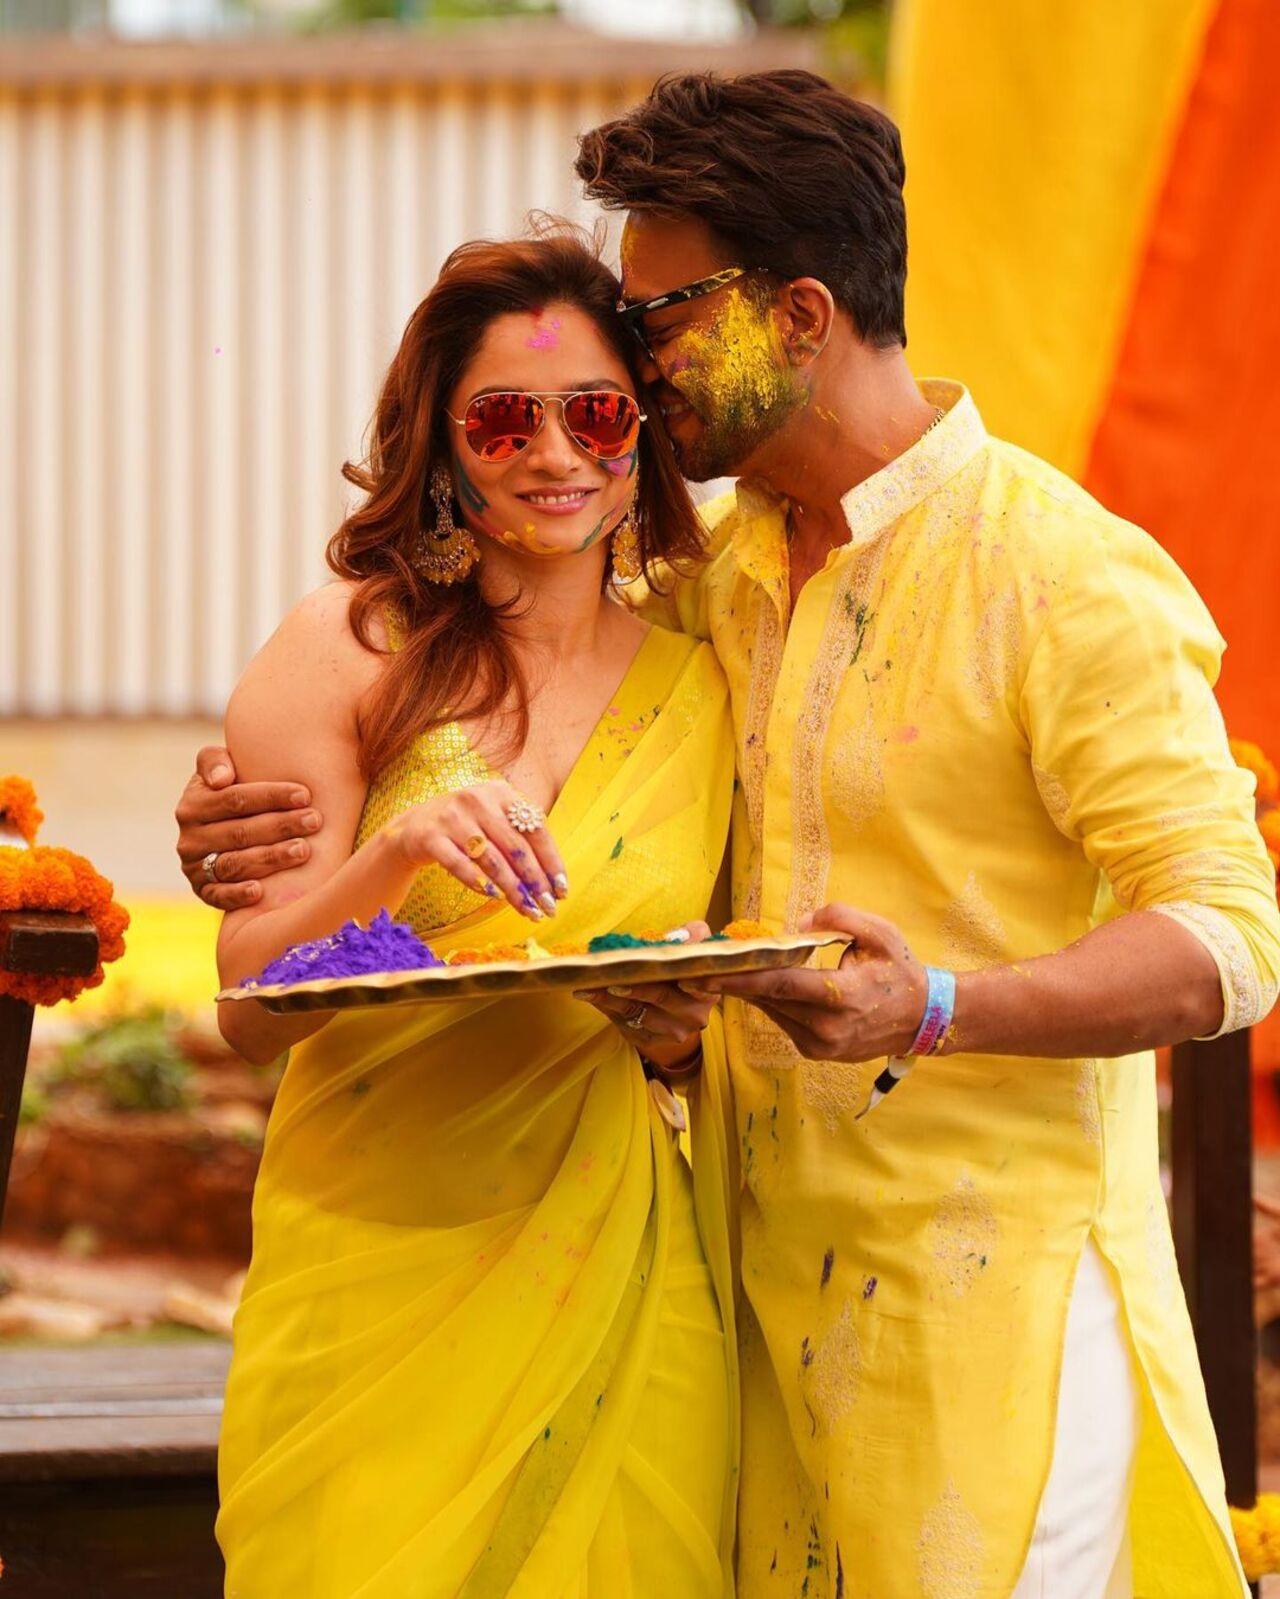 Through these pictures they make us fall in love with the idea of playing Holi with our partner